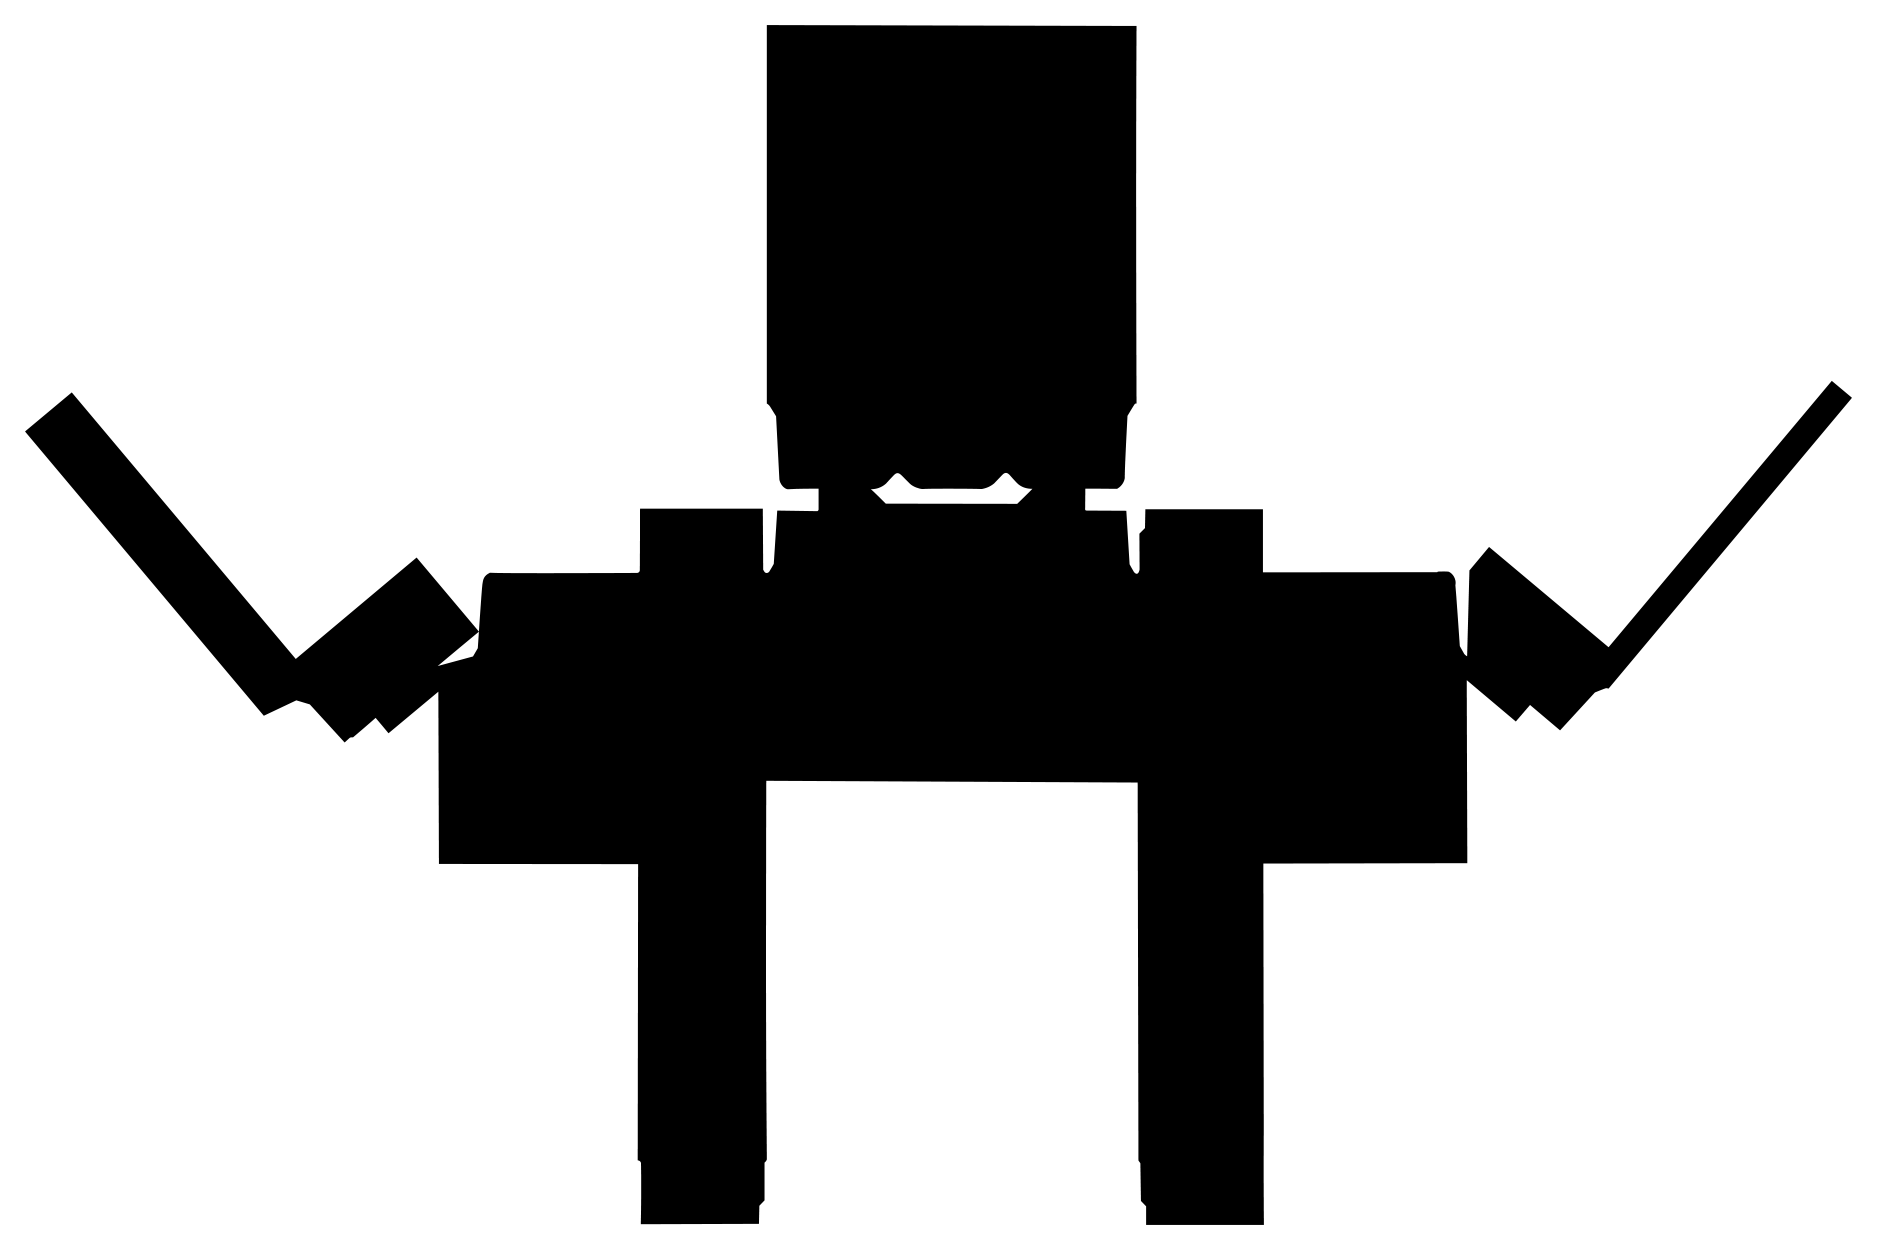 Kashi GOLEAN Cereal BoxBot silhouette